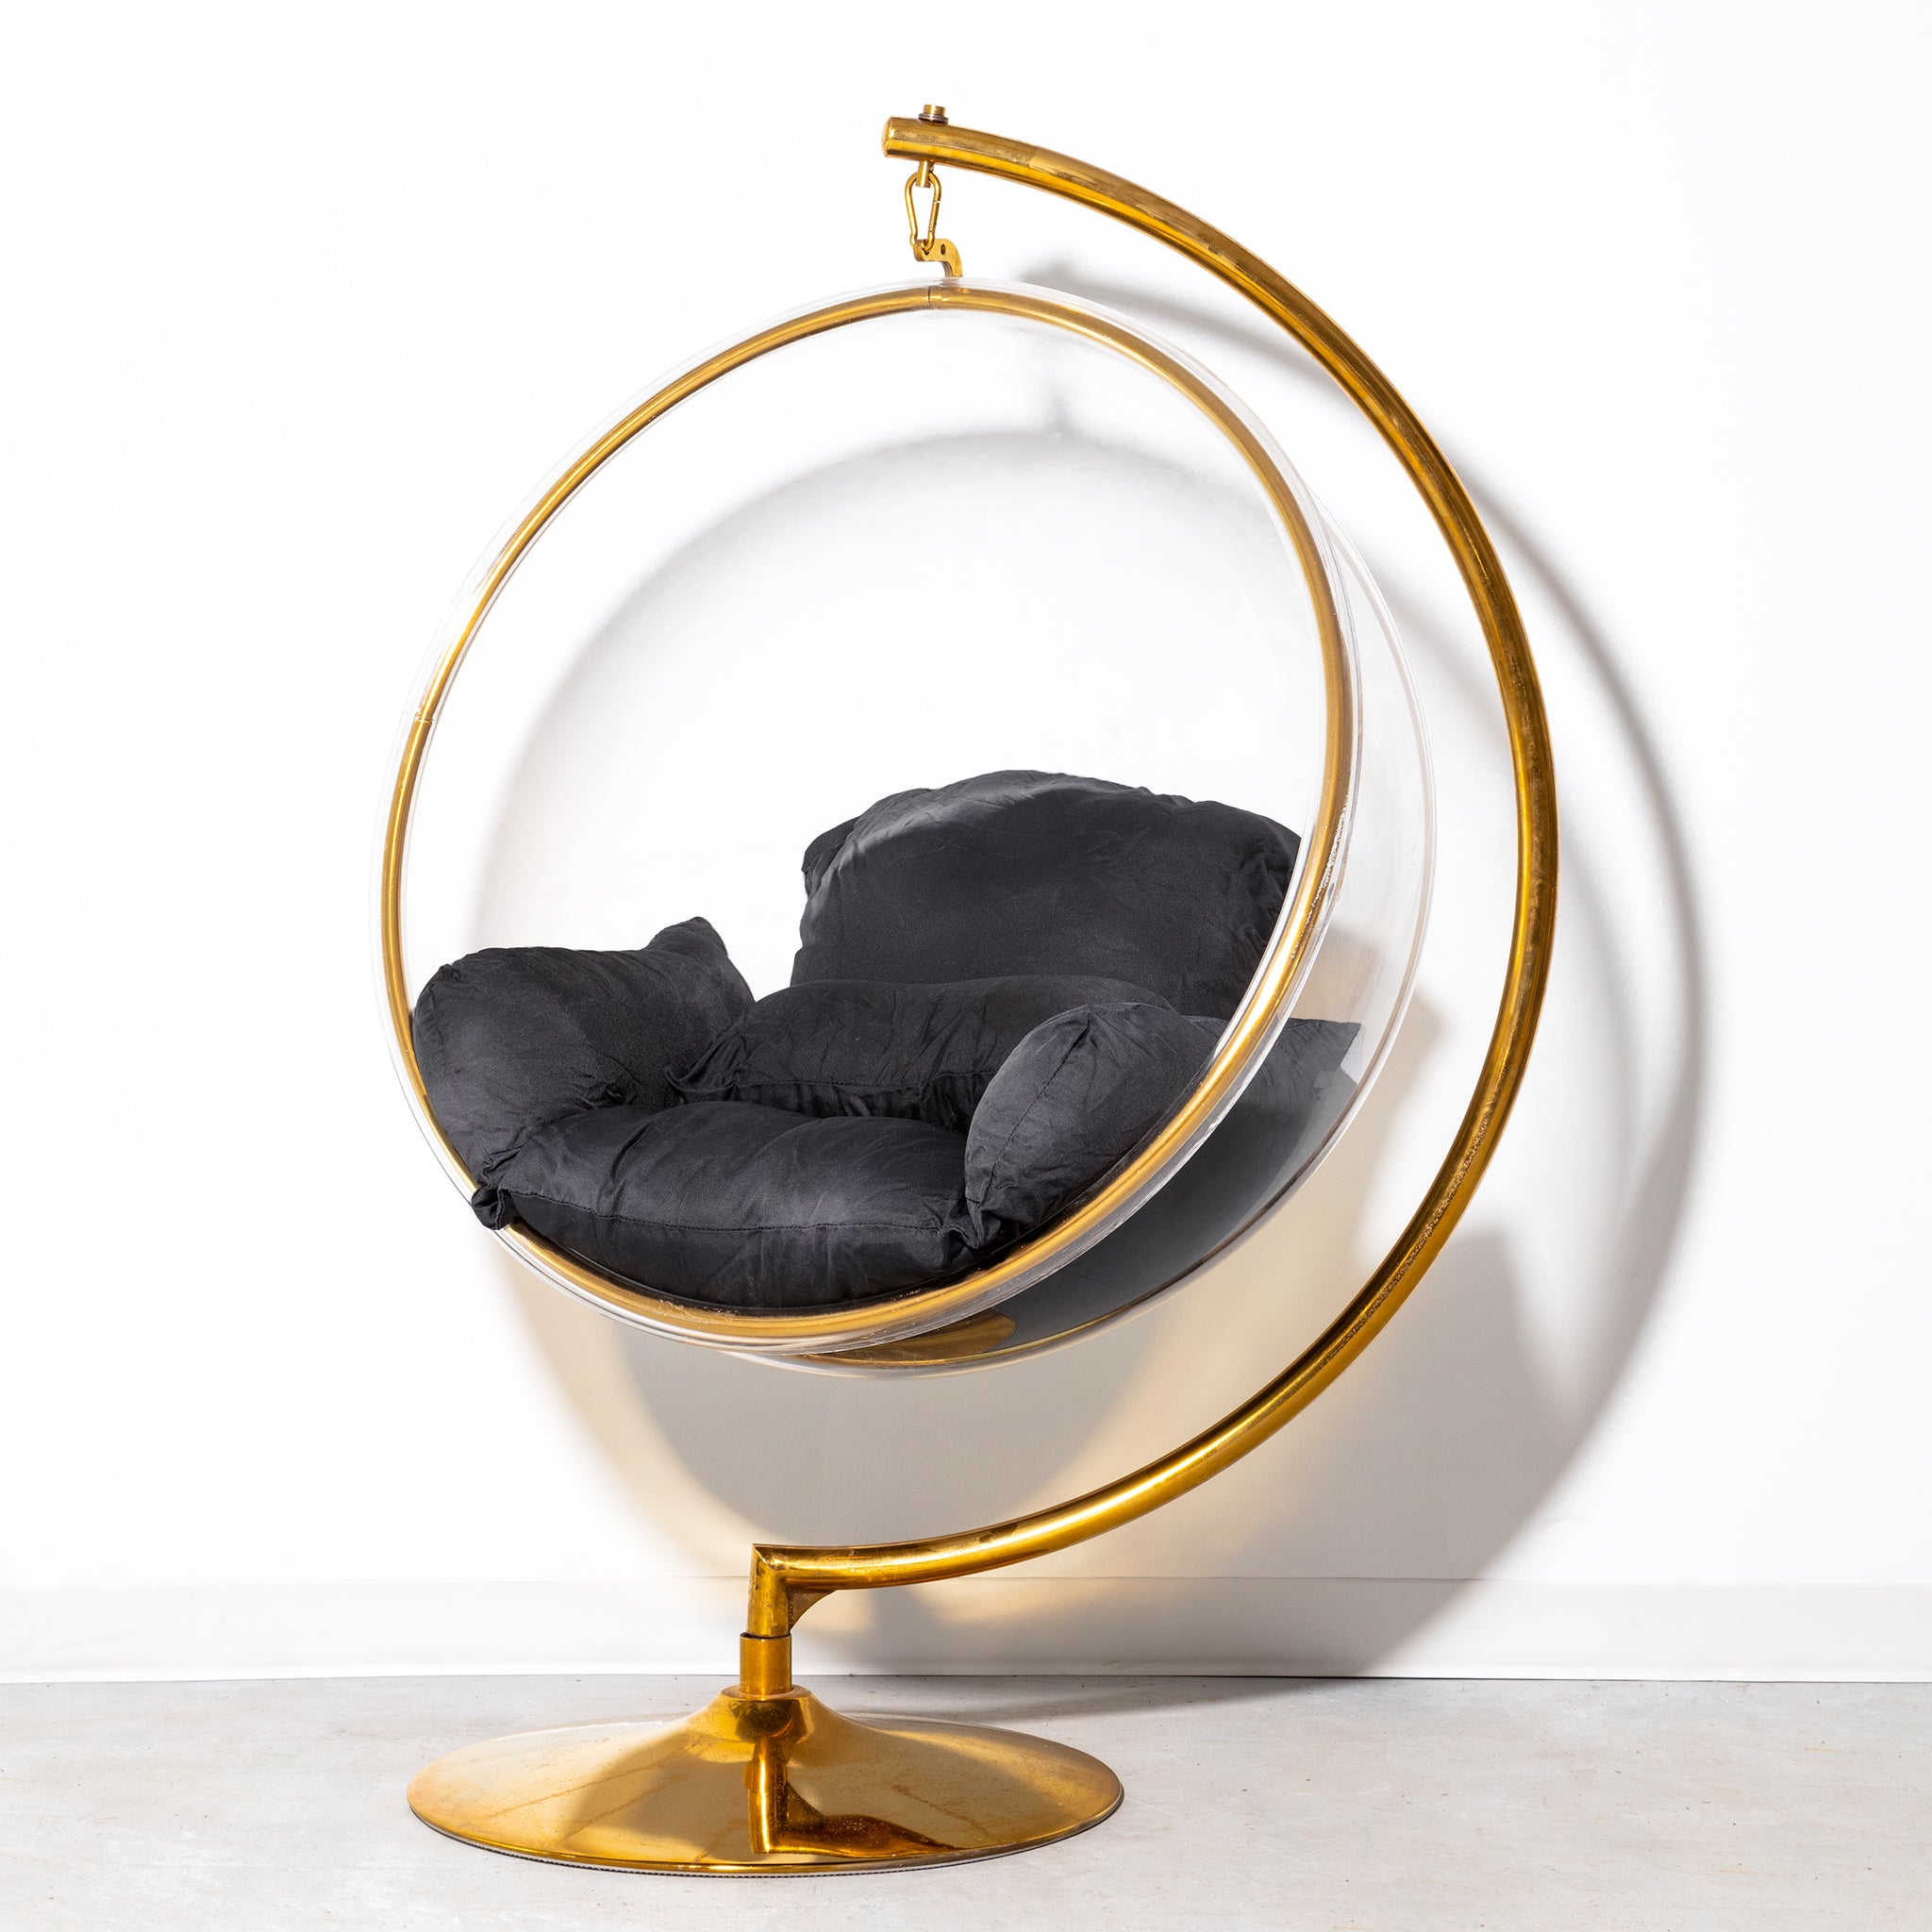 Hanging bubble chair with gold stainless steel base, clear acrylic shell, and black cushions with pre-washed removable covers